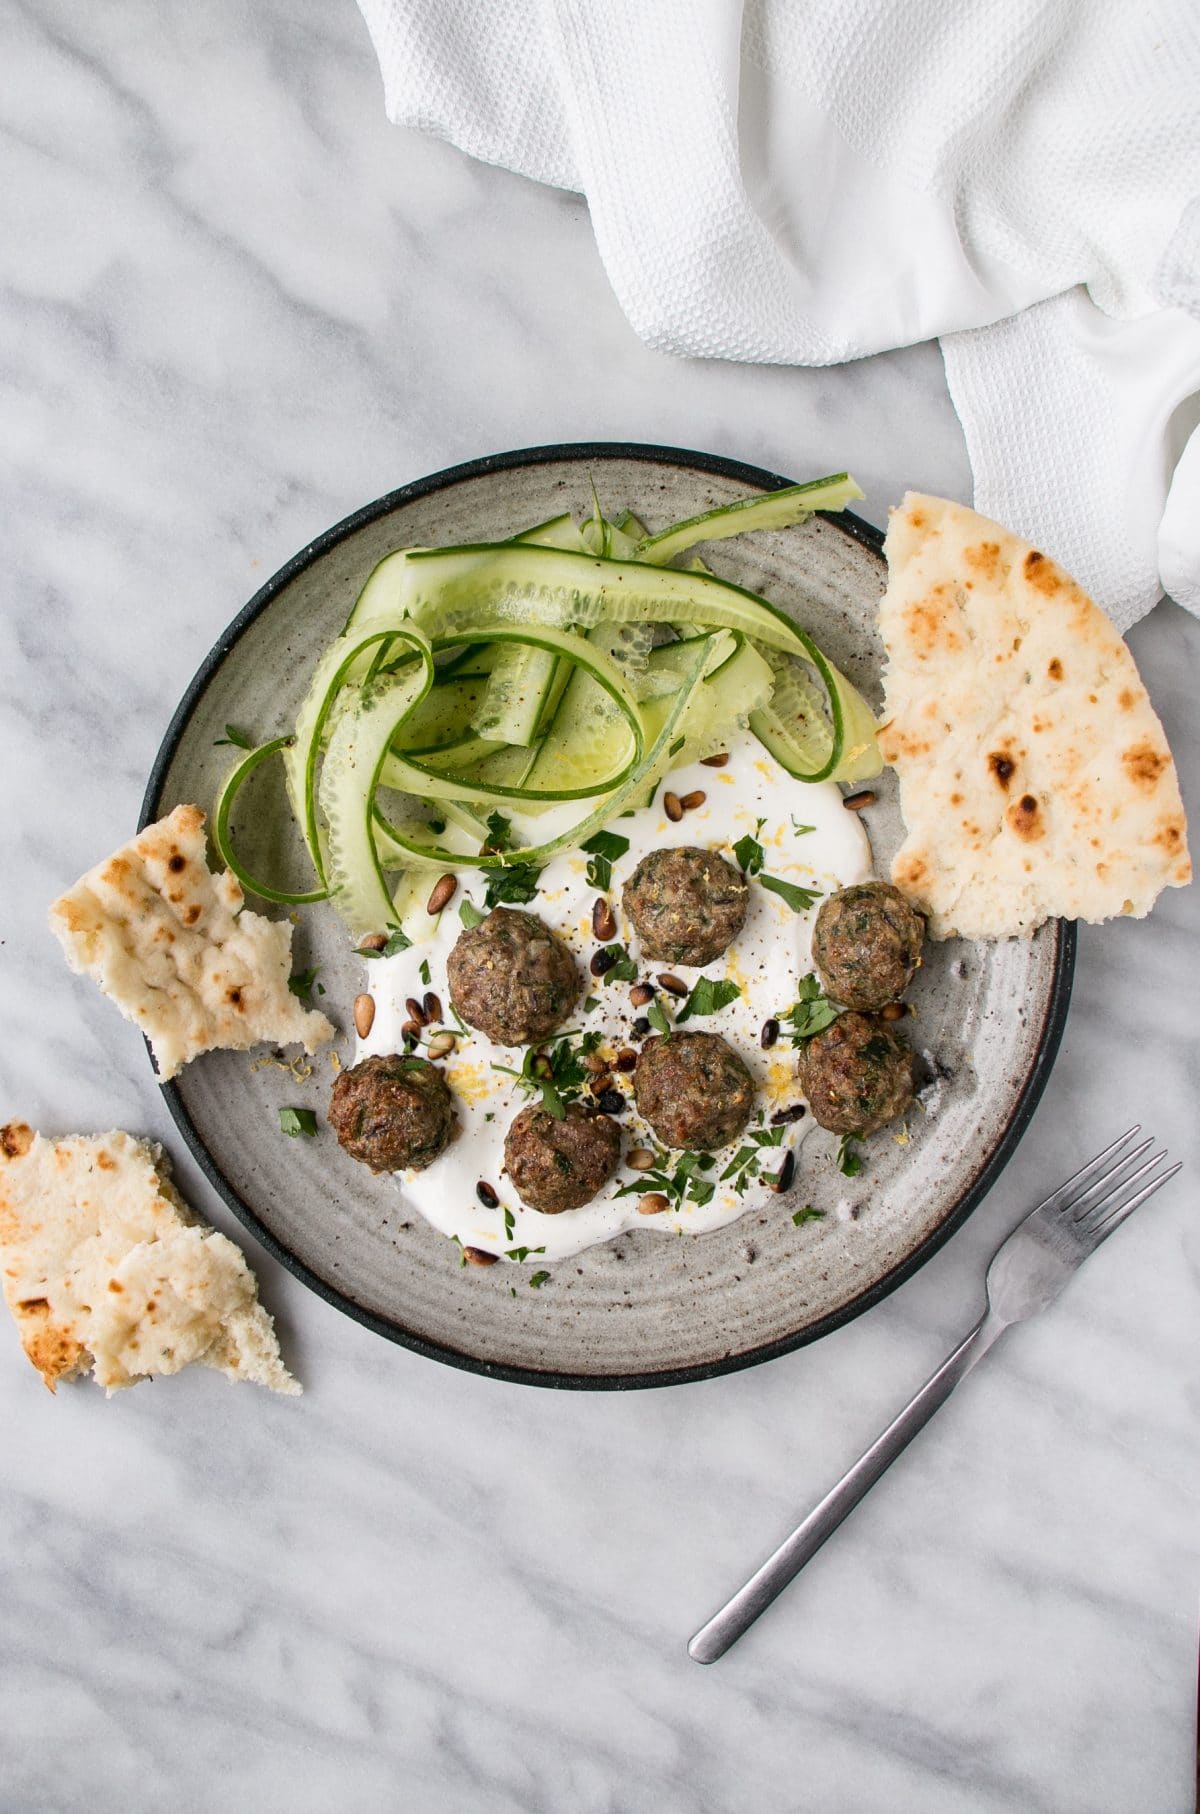 Mini Herby Lamb Meatballs are a quick and easy way to bake juicy and tasty meatballs for dinner! Serve with yogurt and cucumber salad for a refreshing supper! #meatballs #lambs #dinner #weekdaydinner